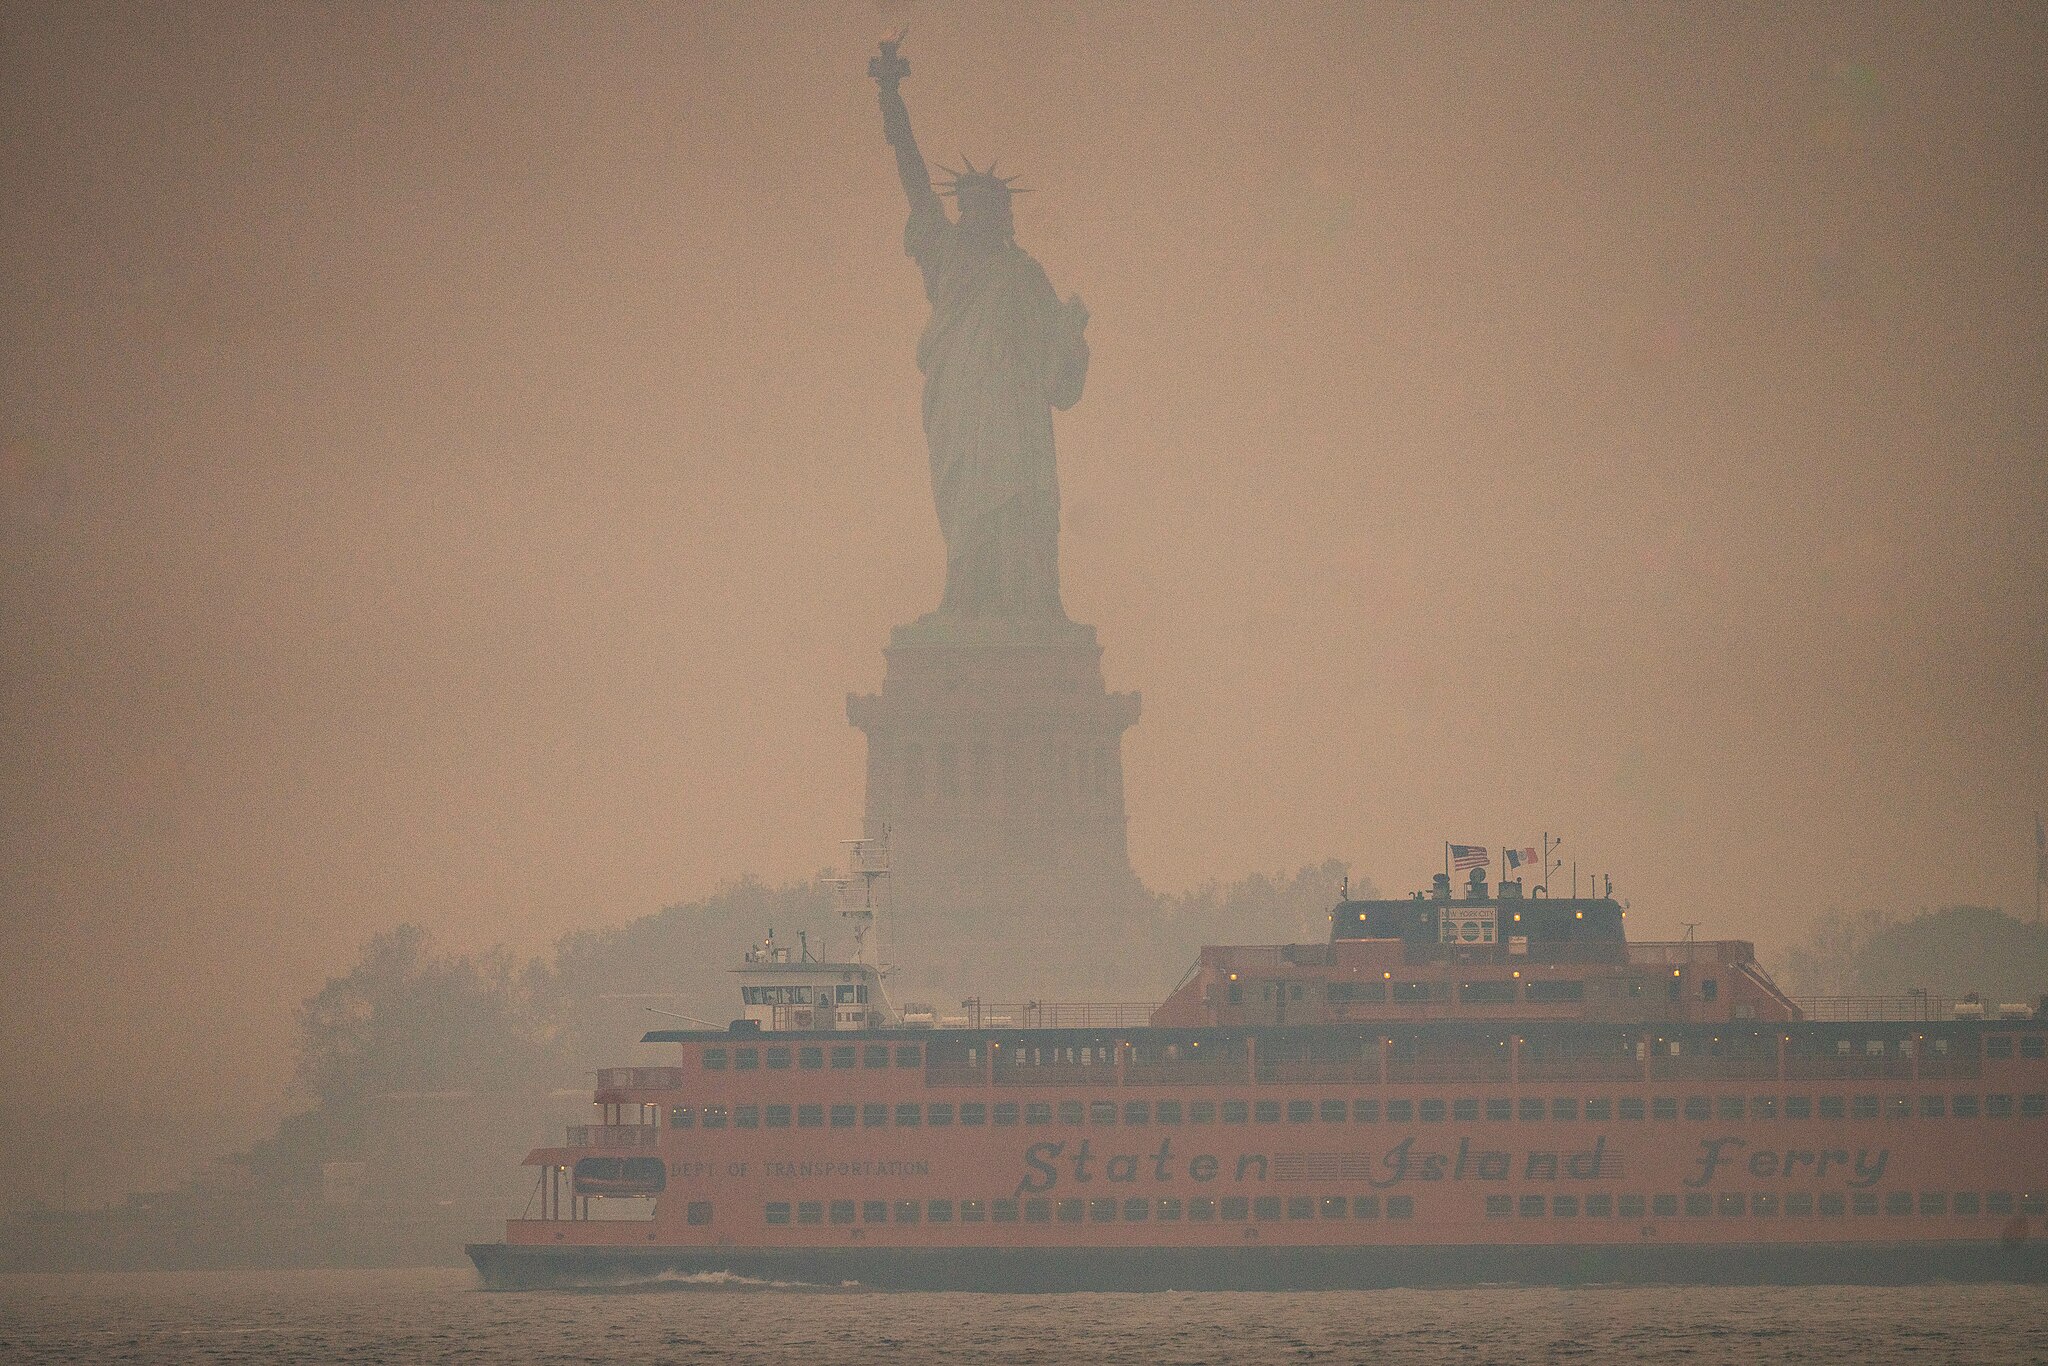 Dense, putrid smoke obscures the Statue of Liberty, with the massive Staten Island Ferry in the foreground